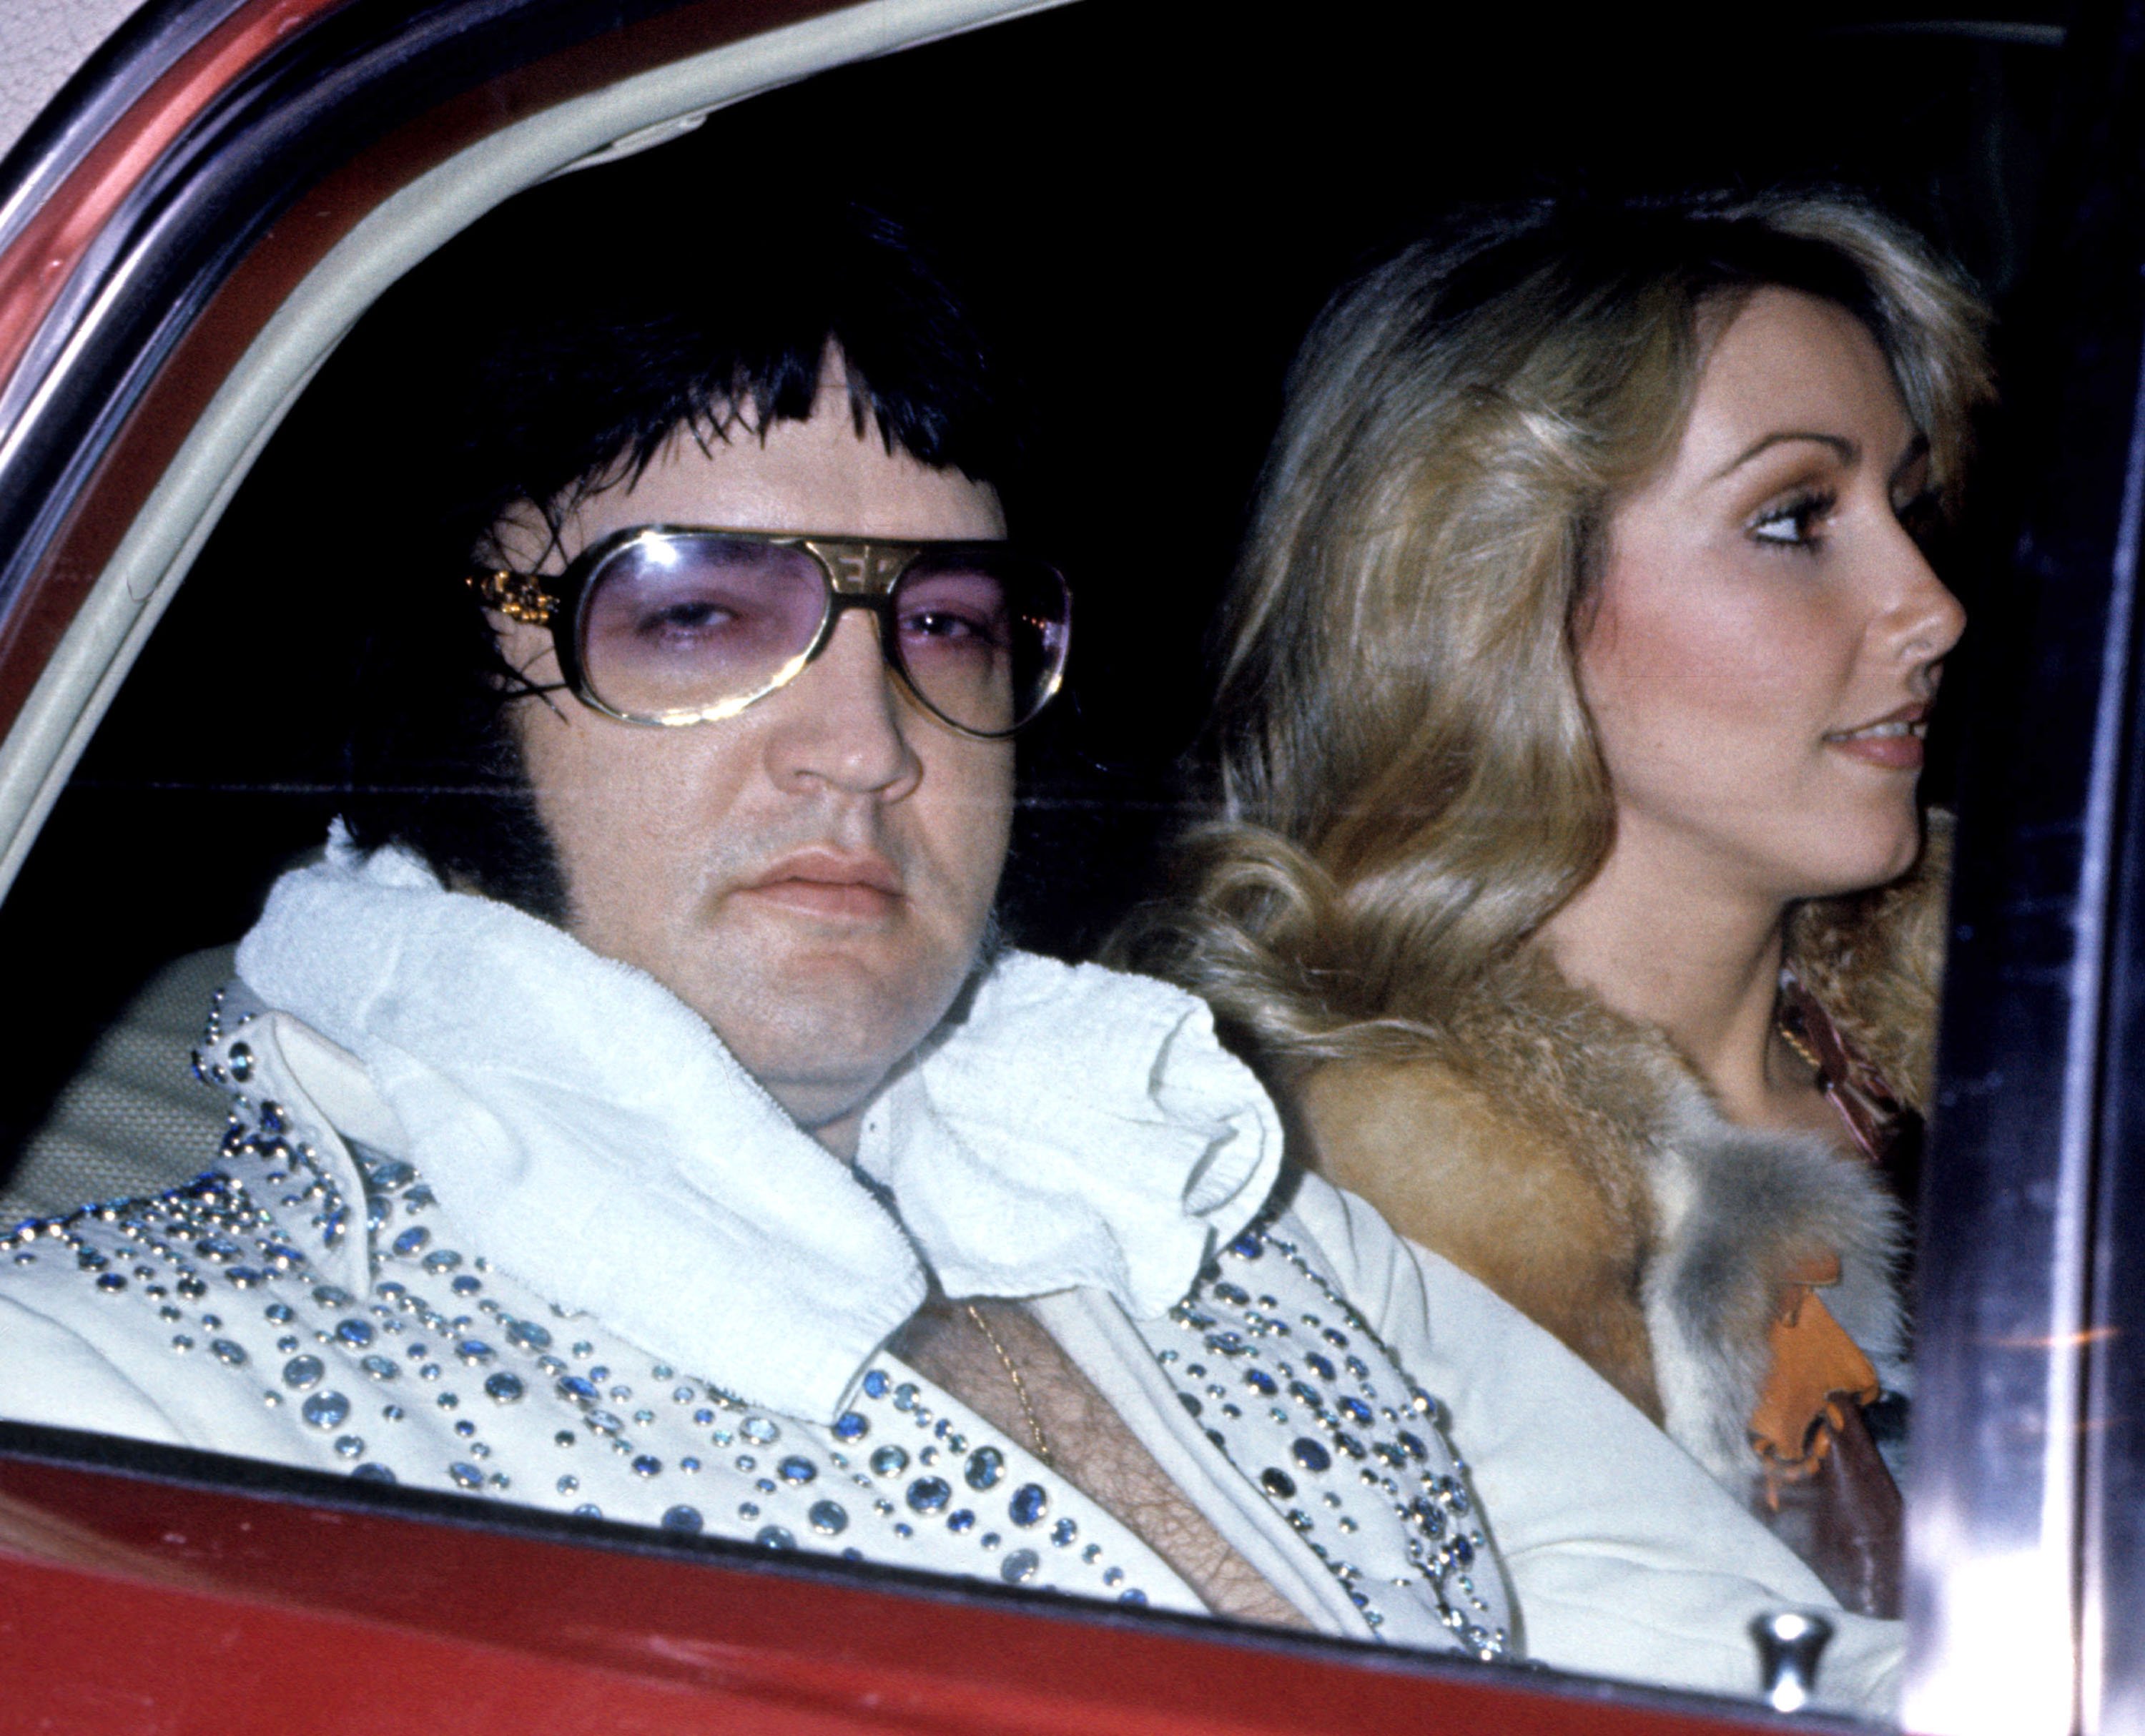 Elvis Presley and Linda Thompson in a car